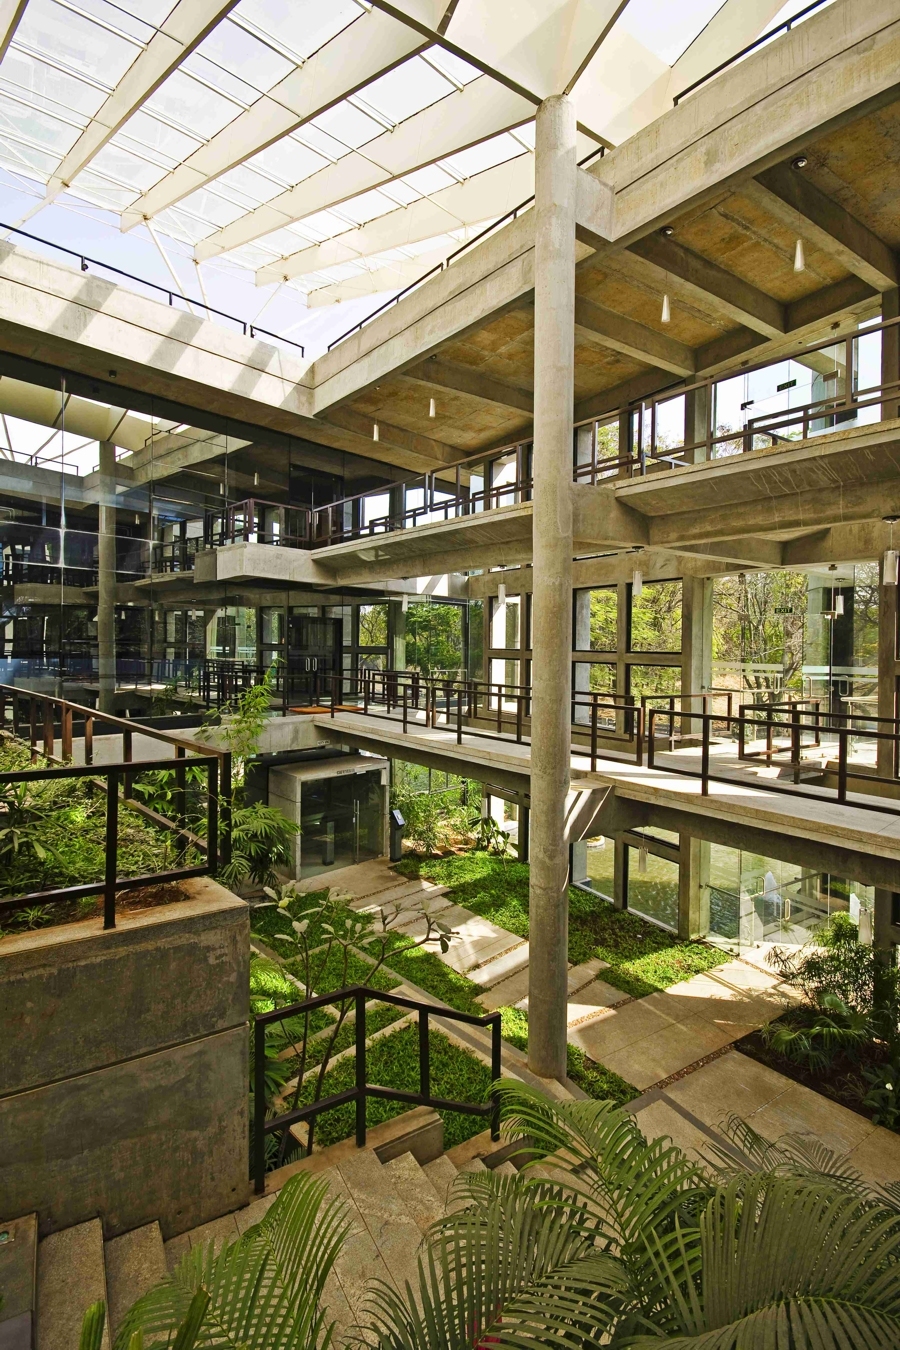 CORE architecture plants a tropical garden on a concrete hillock in this  energy-efficient office building, india